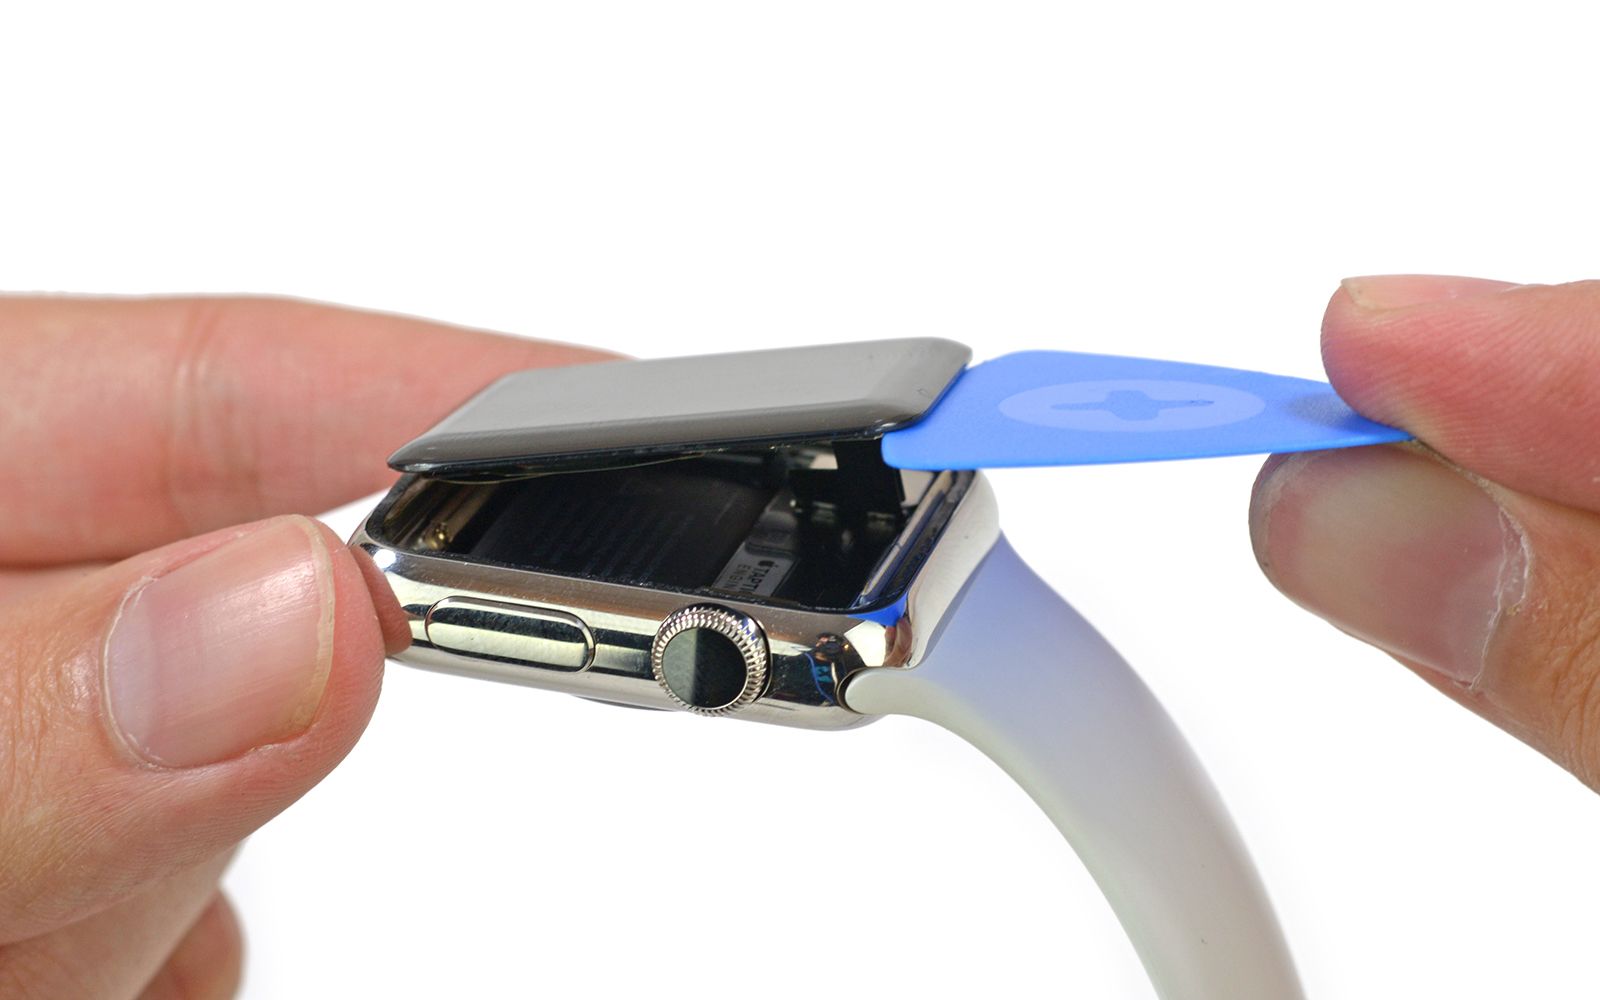 apple watch teardown could measure your blood oxygen battery loses to android wear and more image 1